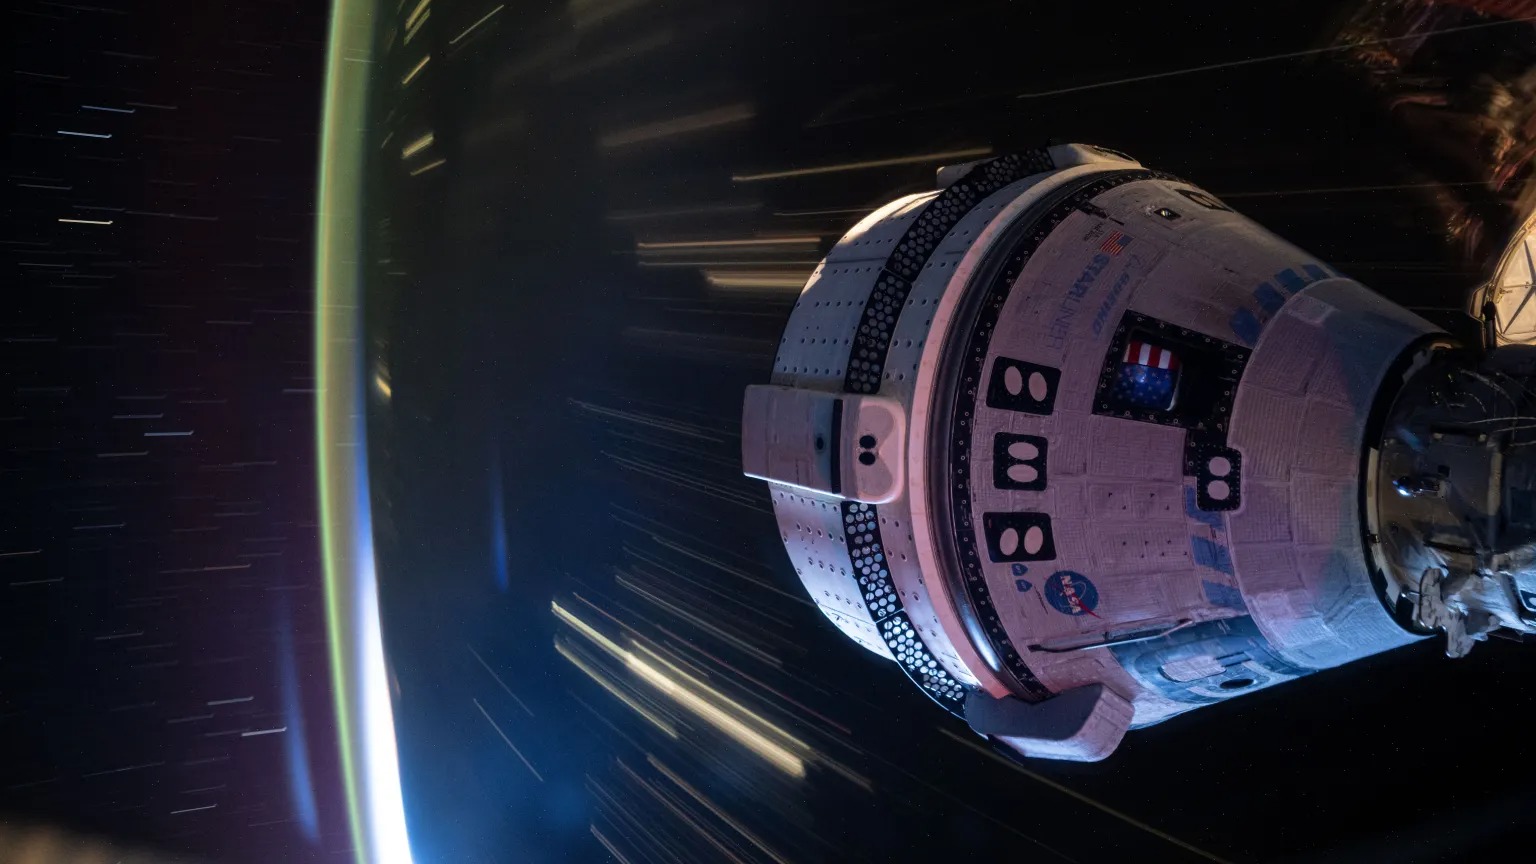  50 days after launch to ISS, Boeing's Starliner still has no landing date  